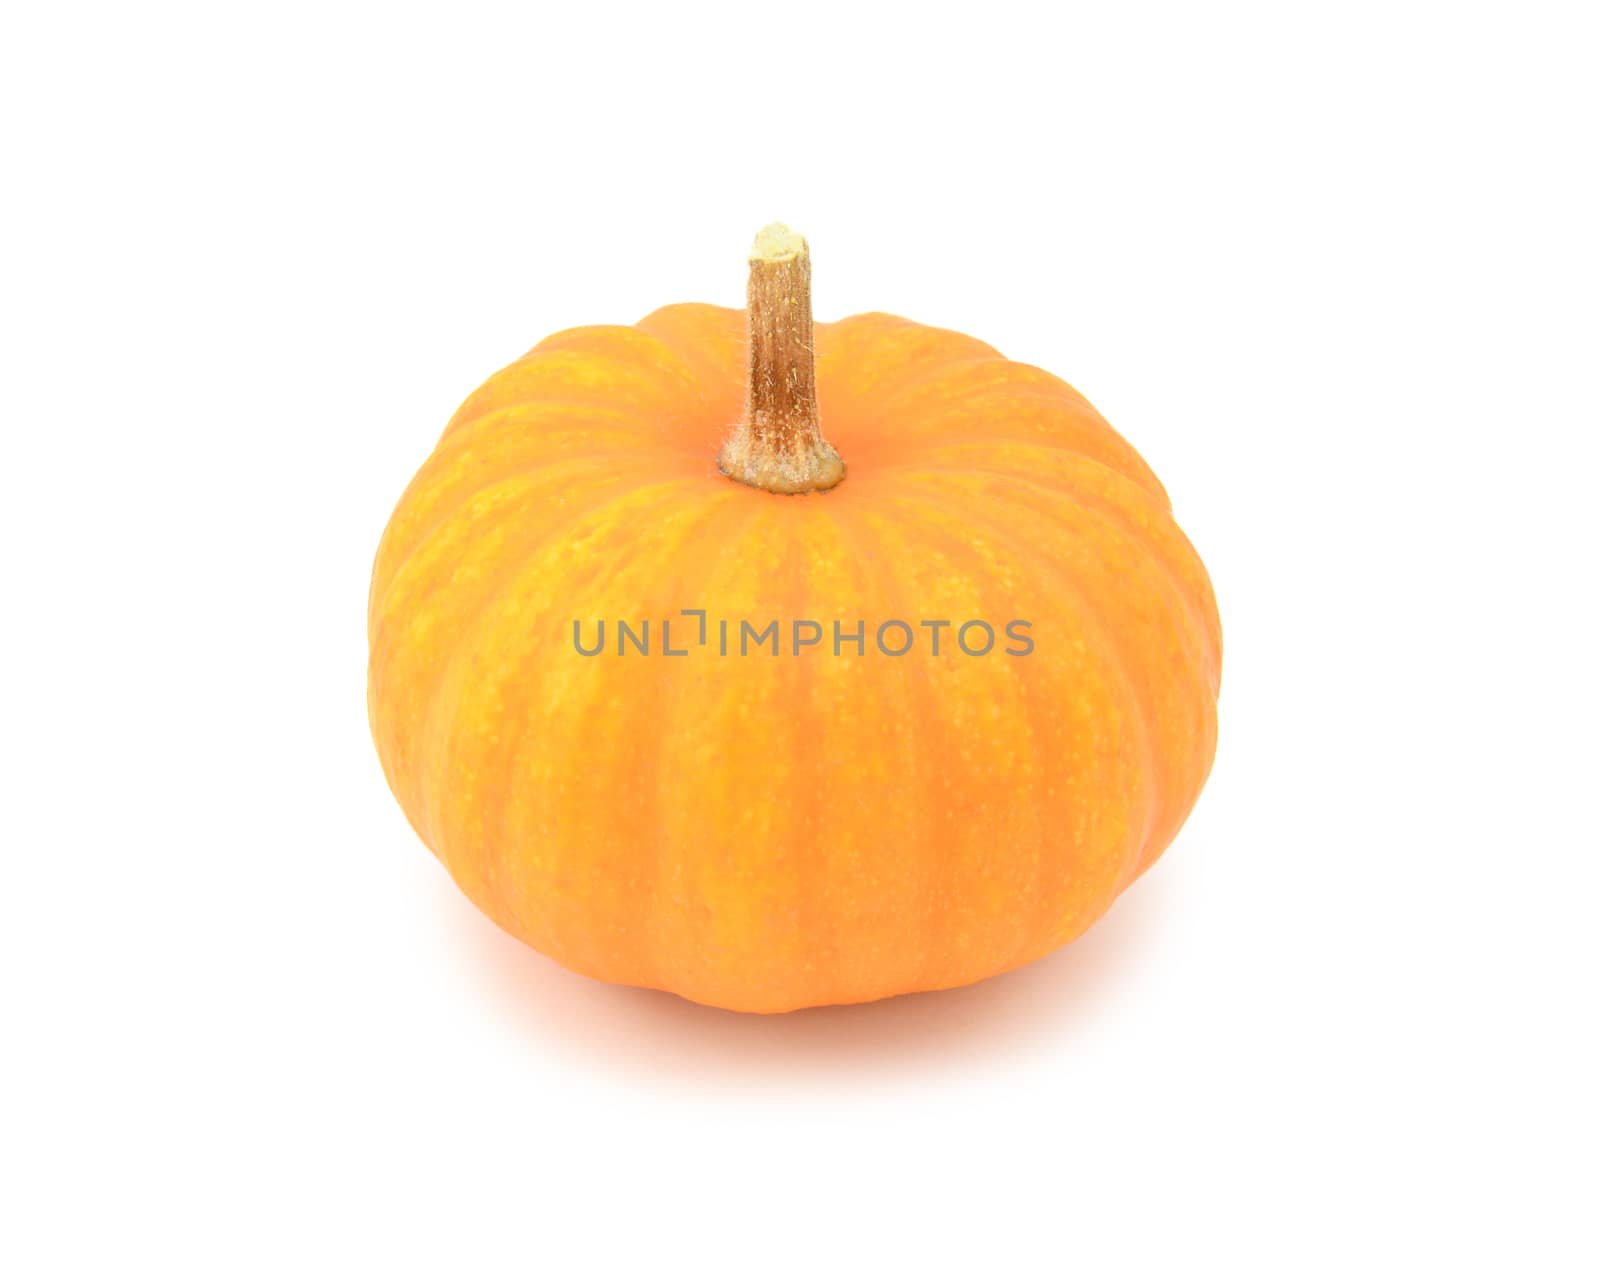 Round, orange Jack Be Little mini pumpkin for Halloween or Thanksgiving, on a white background